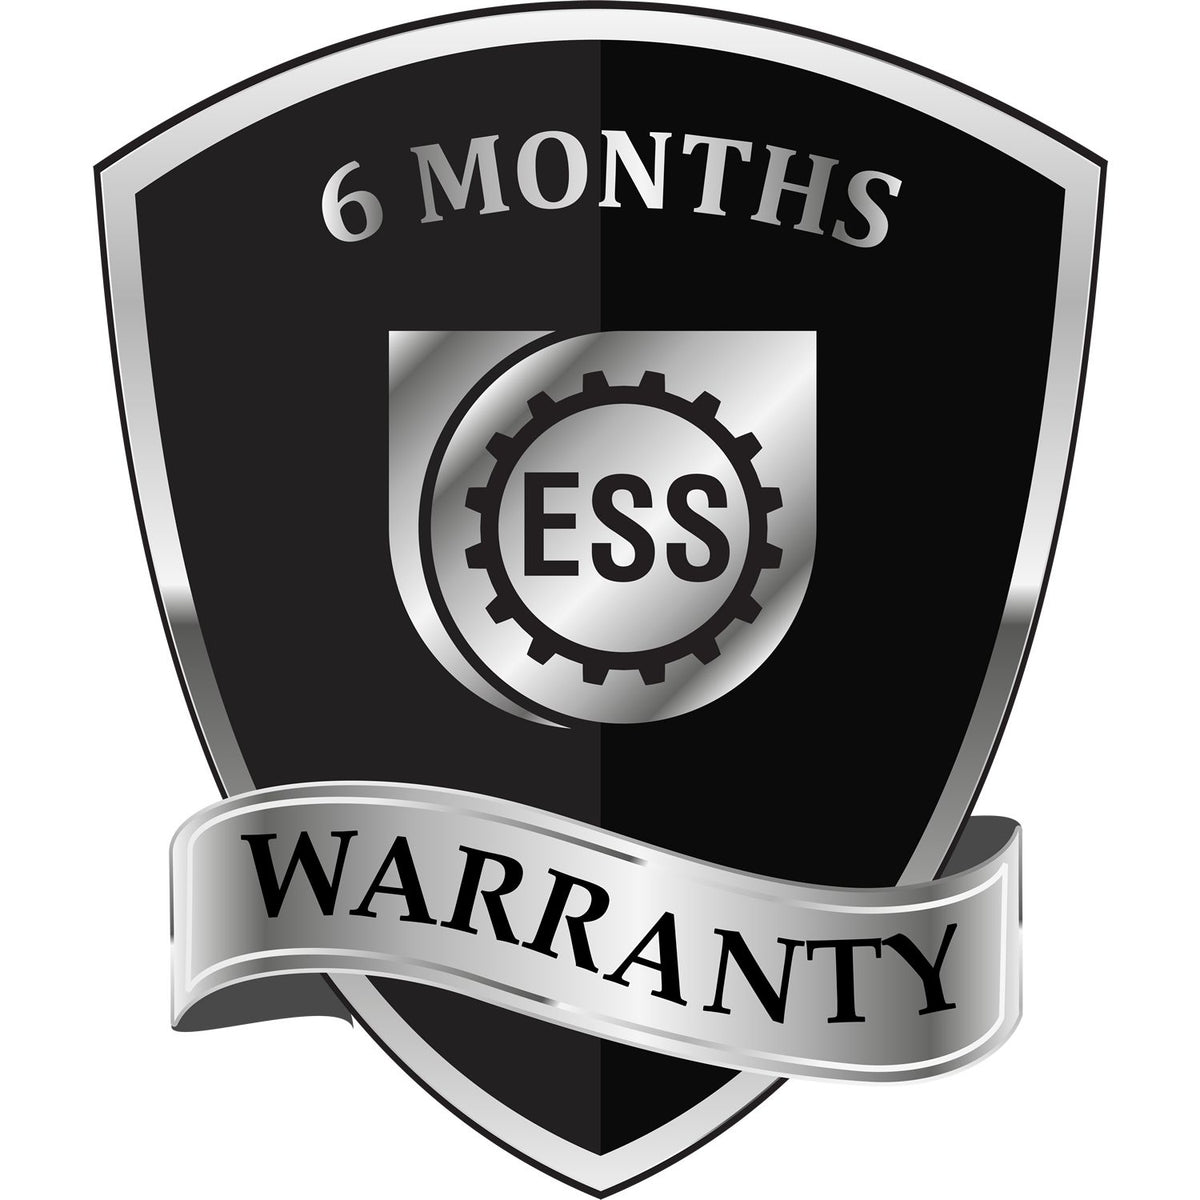 A badge or emblem showing a warranty icon for the Slim Pre-Inked Wisconsin Professional Engineer Seal Stamp